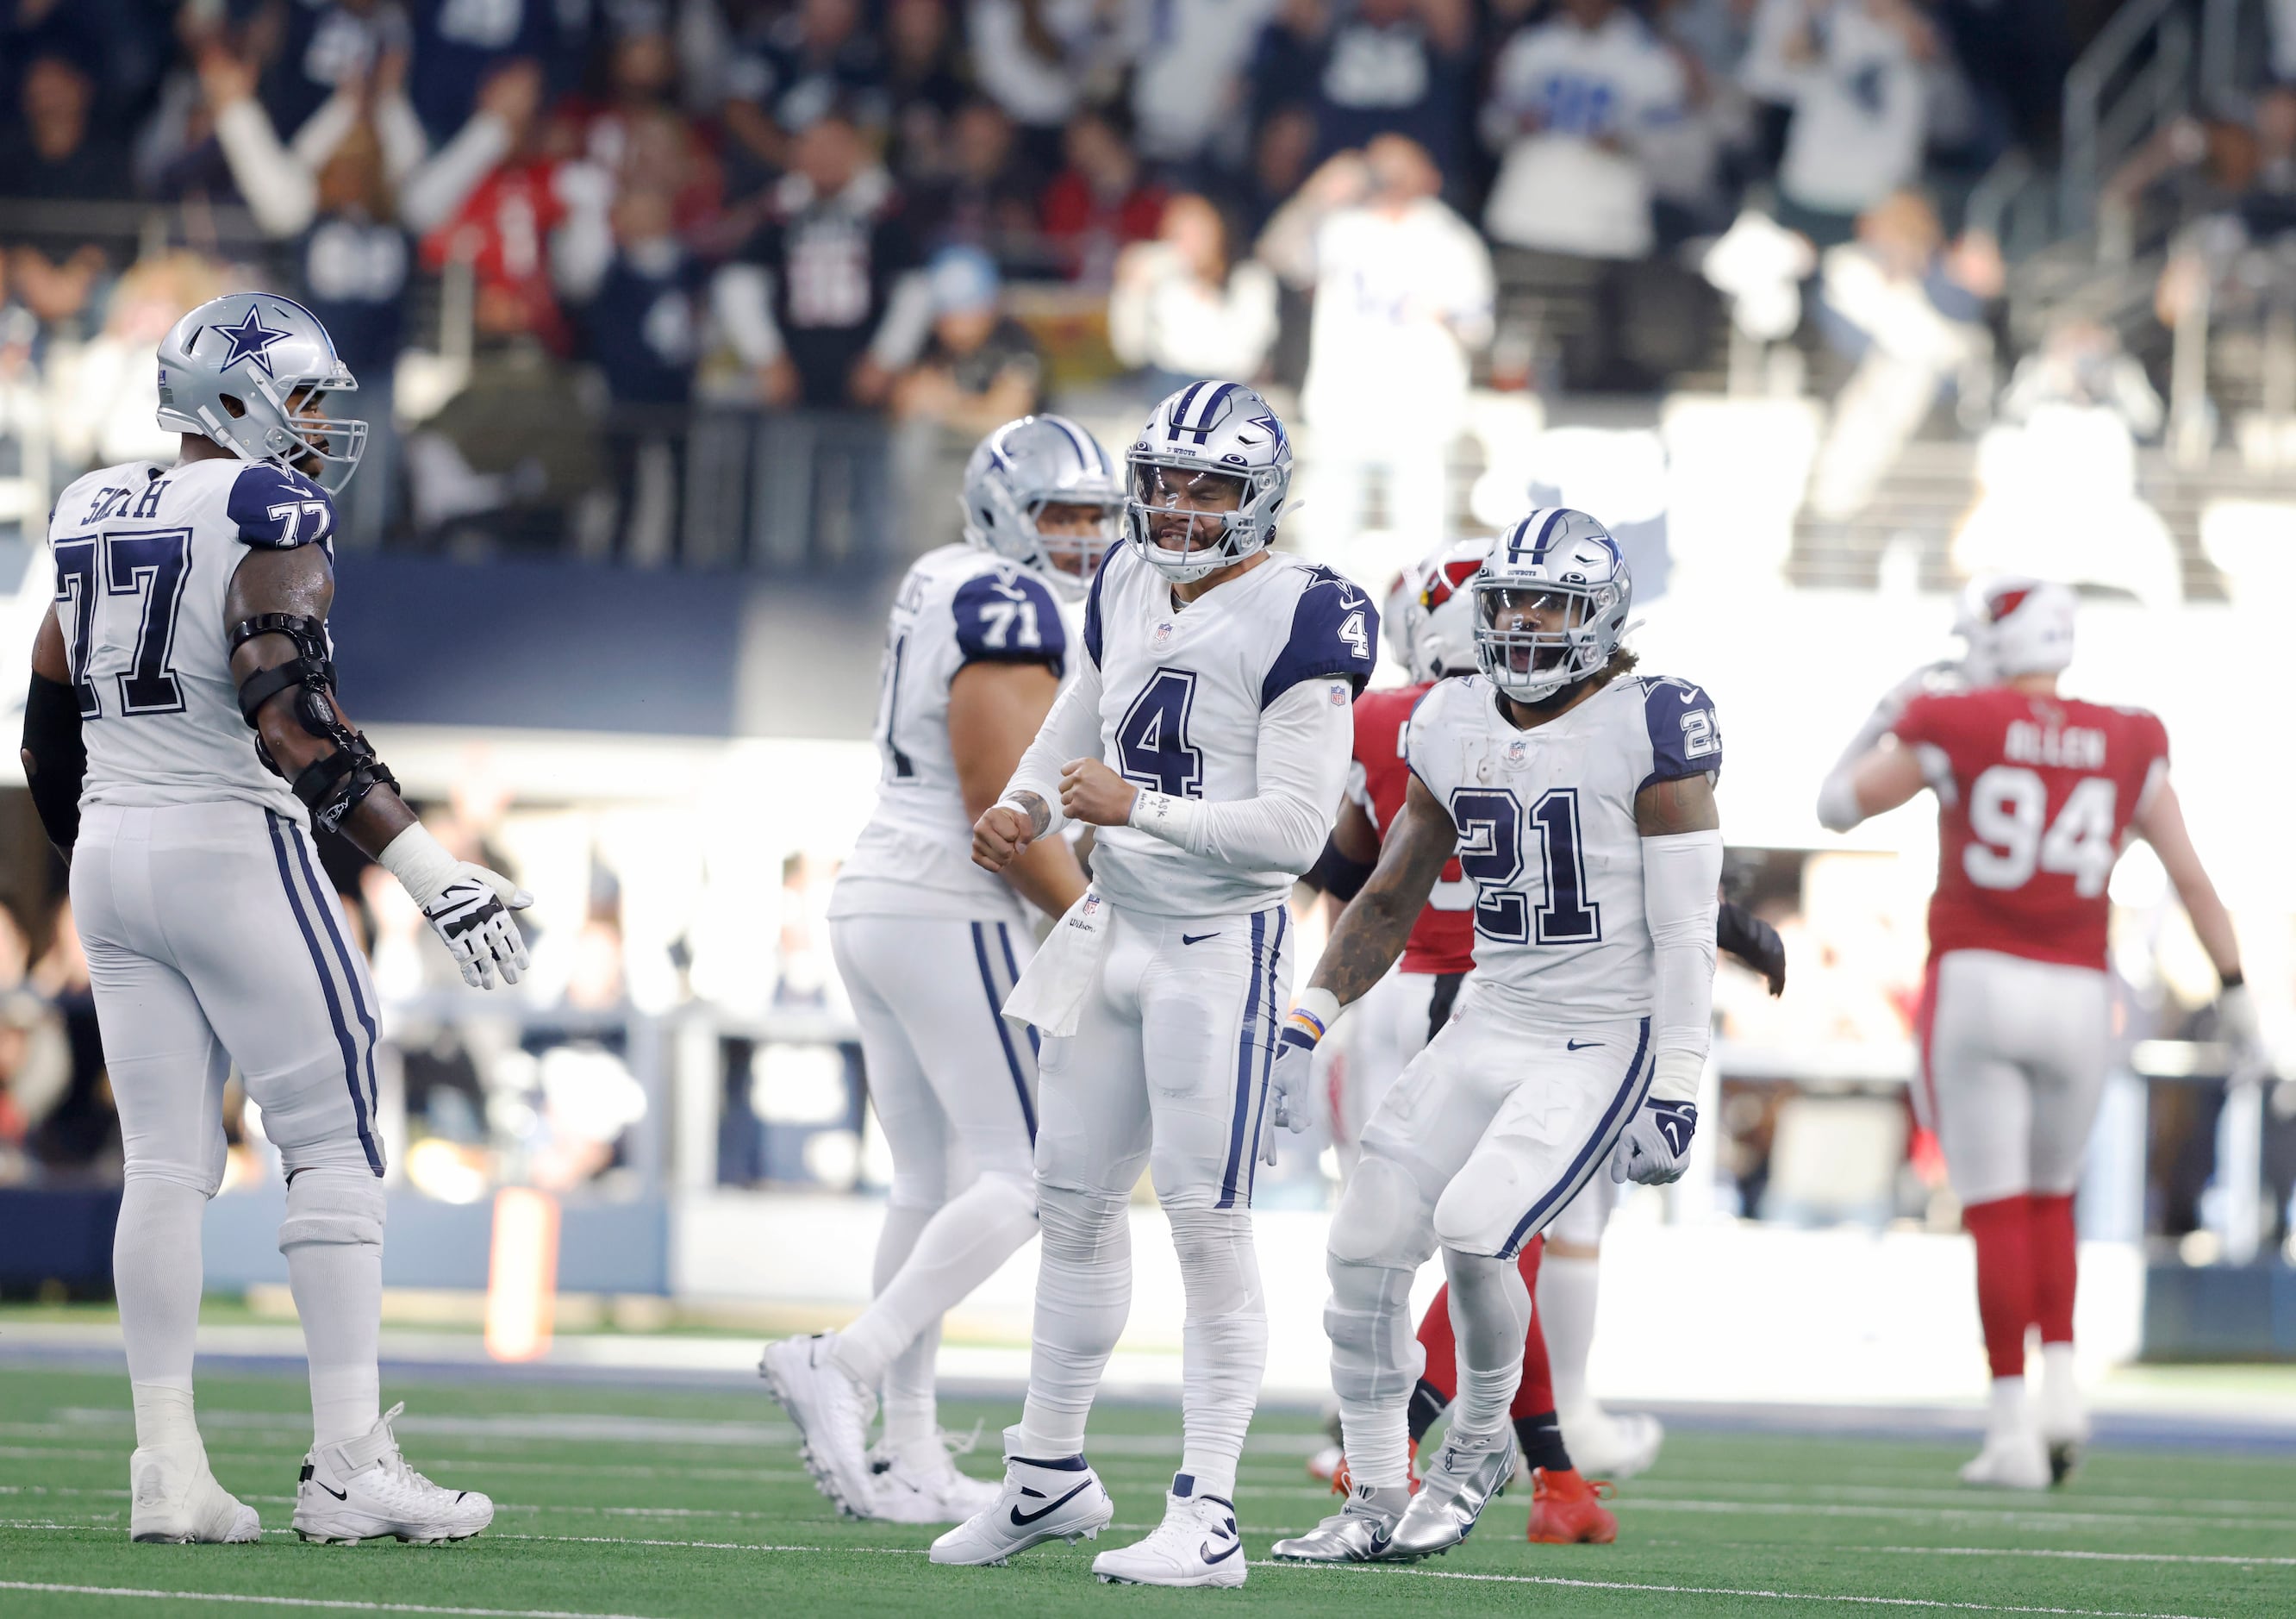 Recapping the 2022 Season, Loss to Dallas Cowboys in Wild Card Round